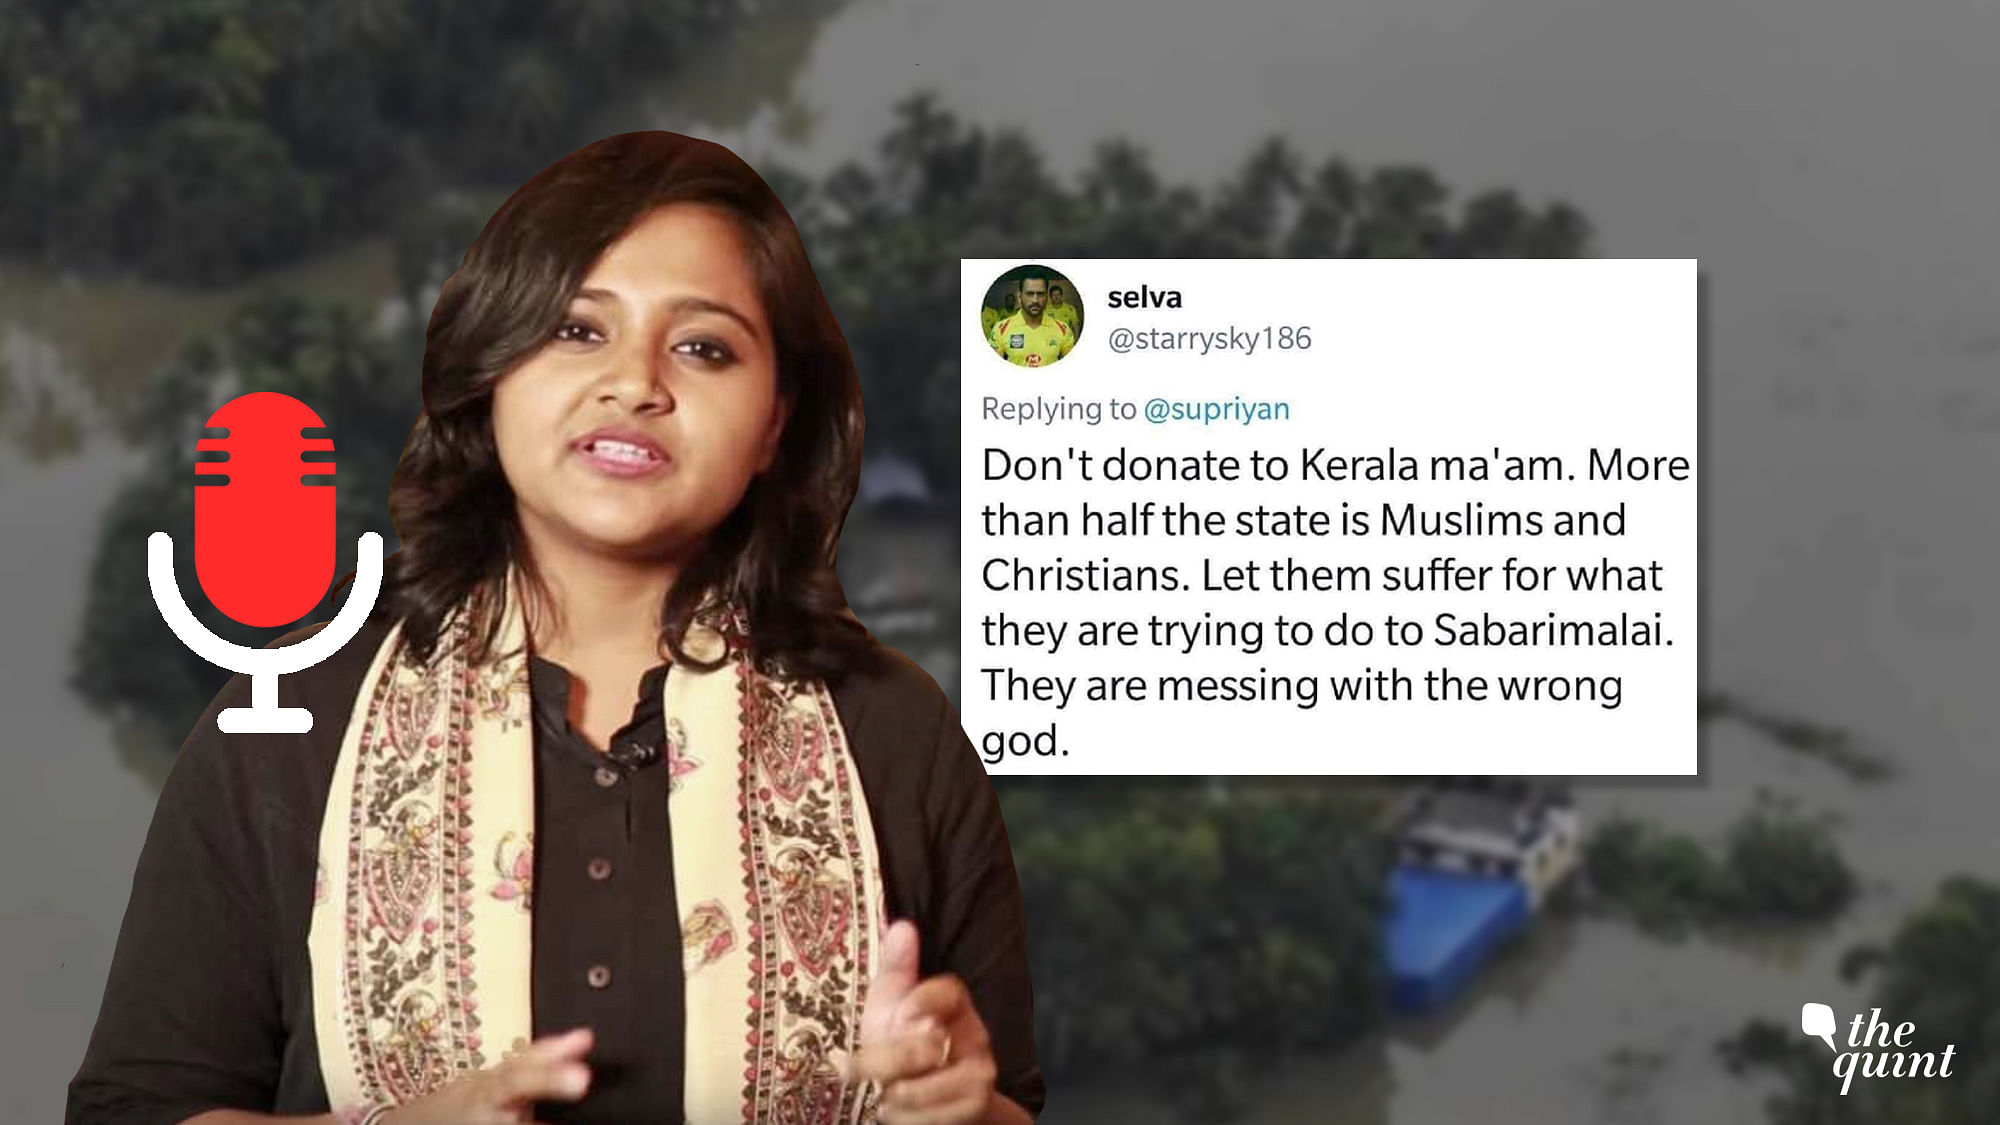 Trolls are blaming women, beef-eaters, Muslims and Christians for Kerala floods. Here is a message for the bigots.